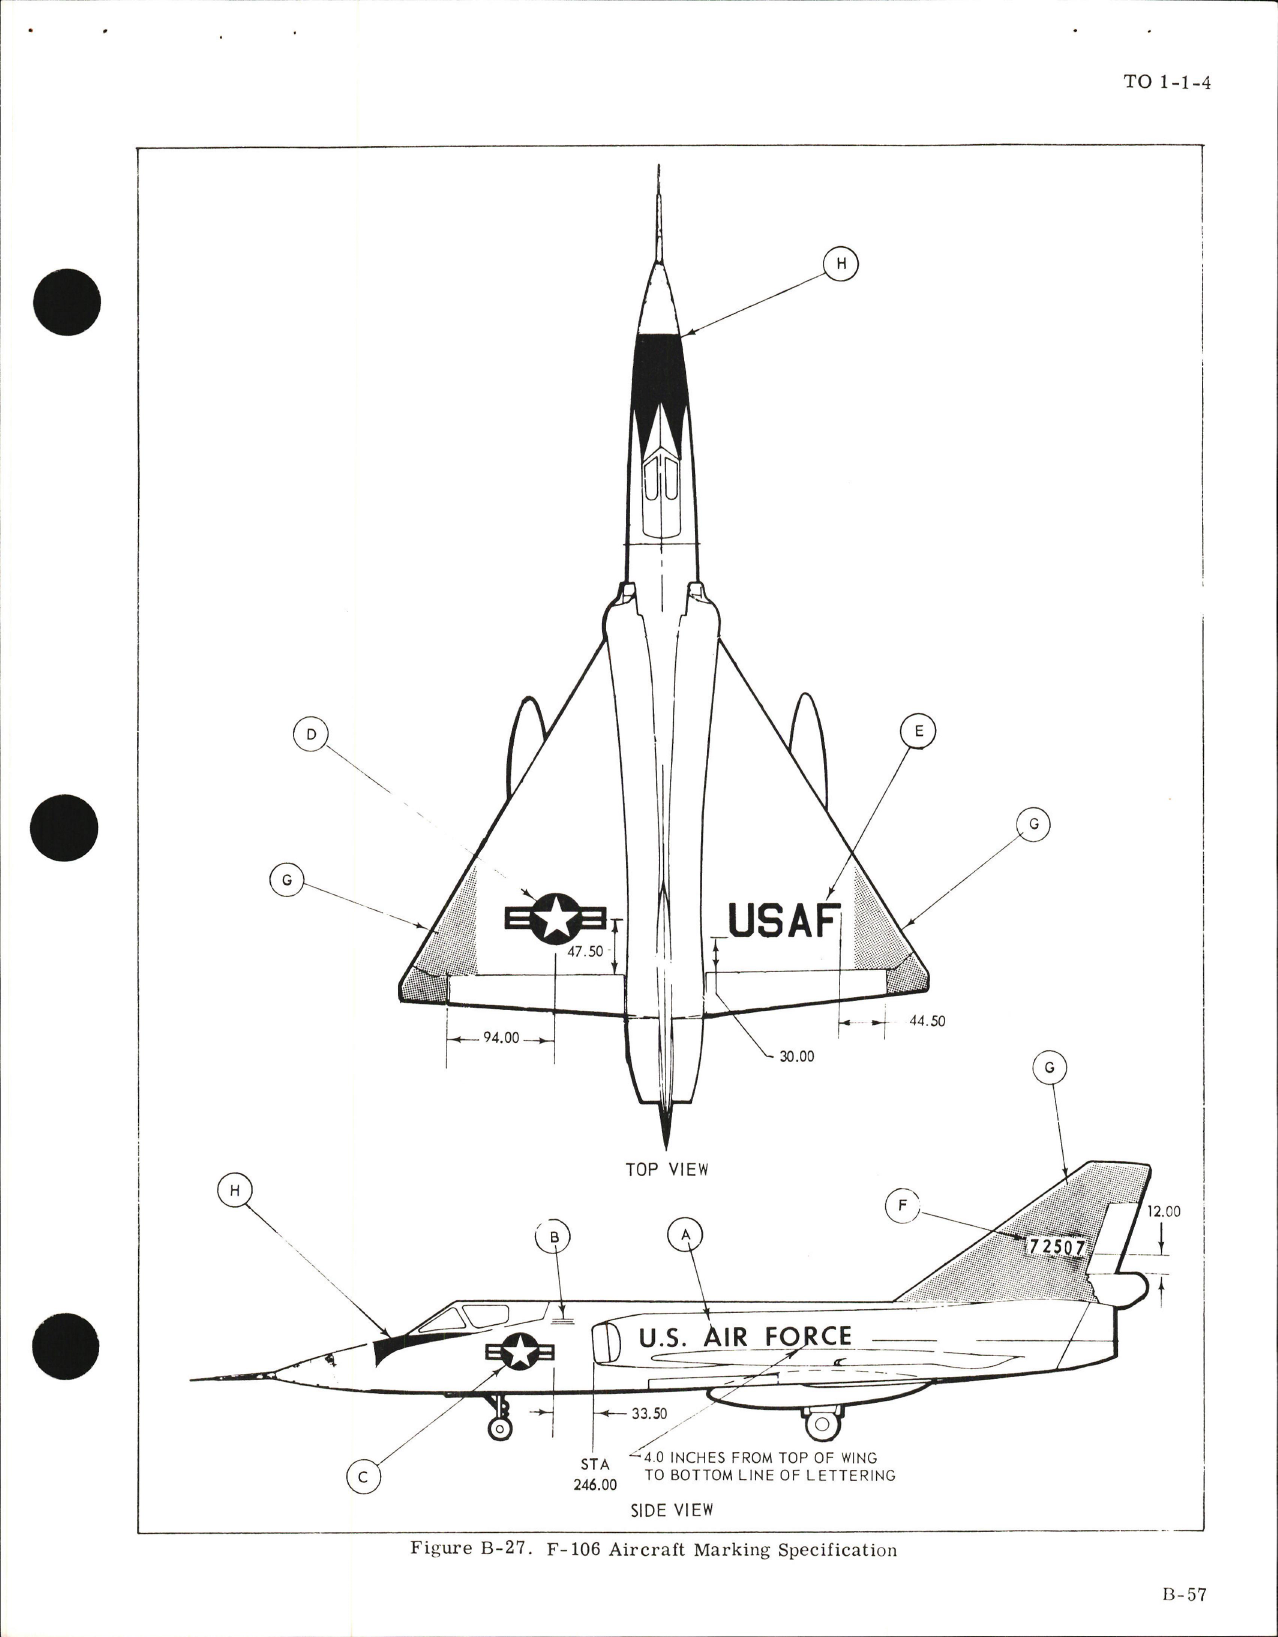 Sample page 11 from AirCorps Library document: Exterior Finishes, Insignia and Markings for USAF Aircraft - Change - 19